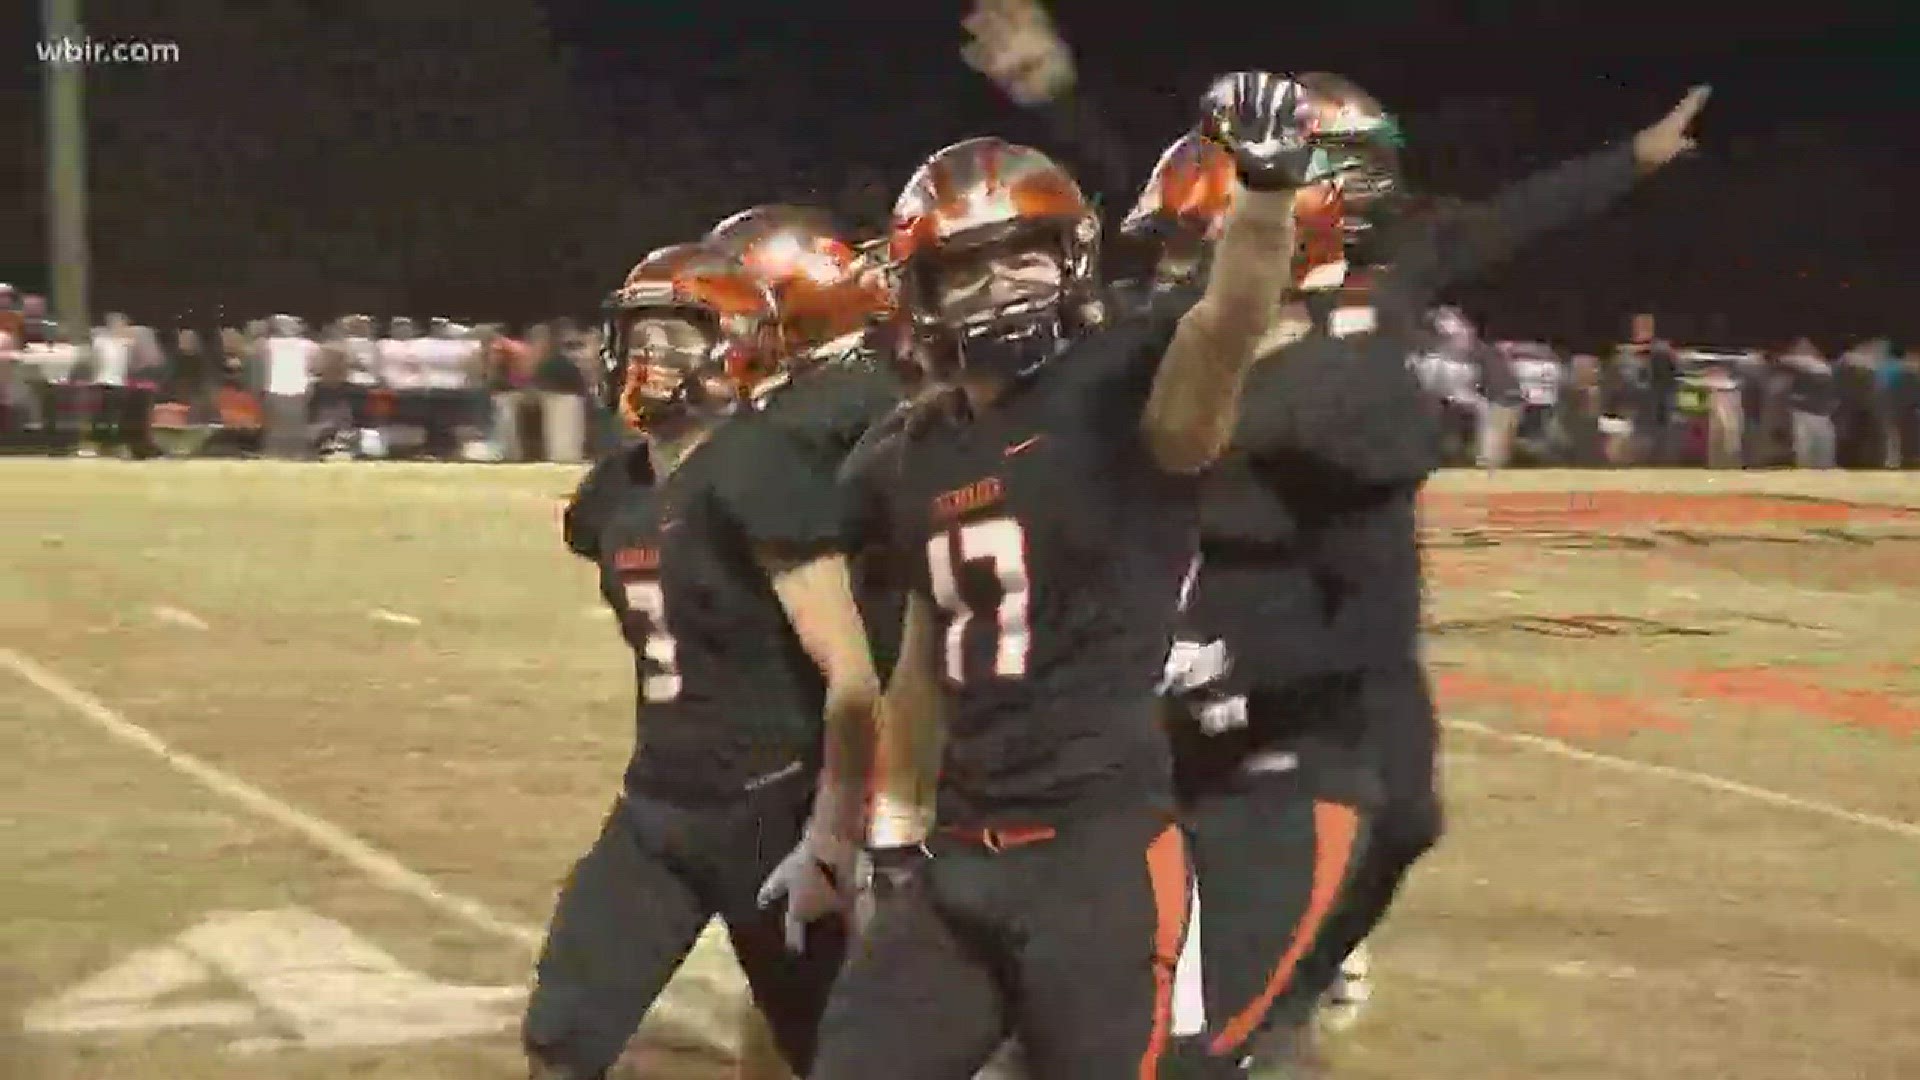 Coalfield came into this game with revenge on its mind, could Greenback continue its winning ways?